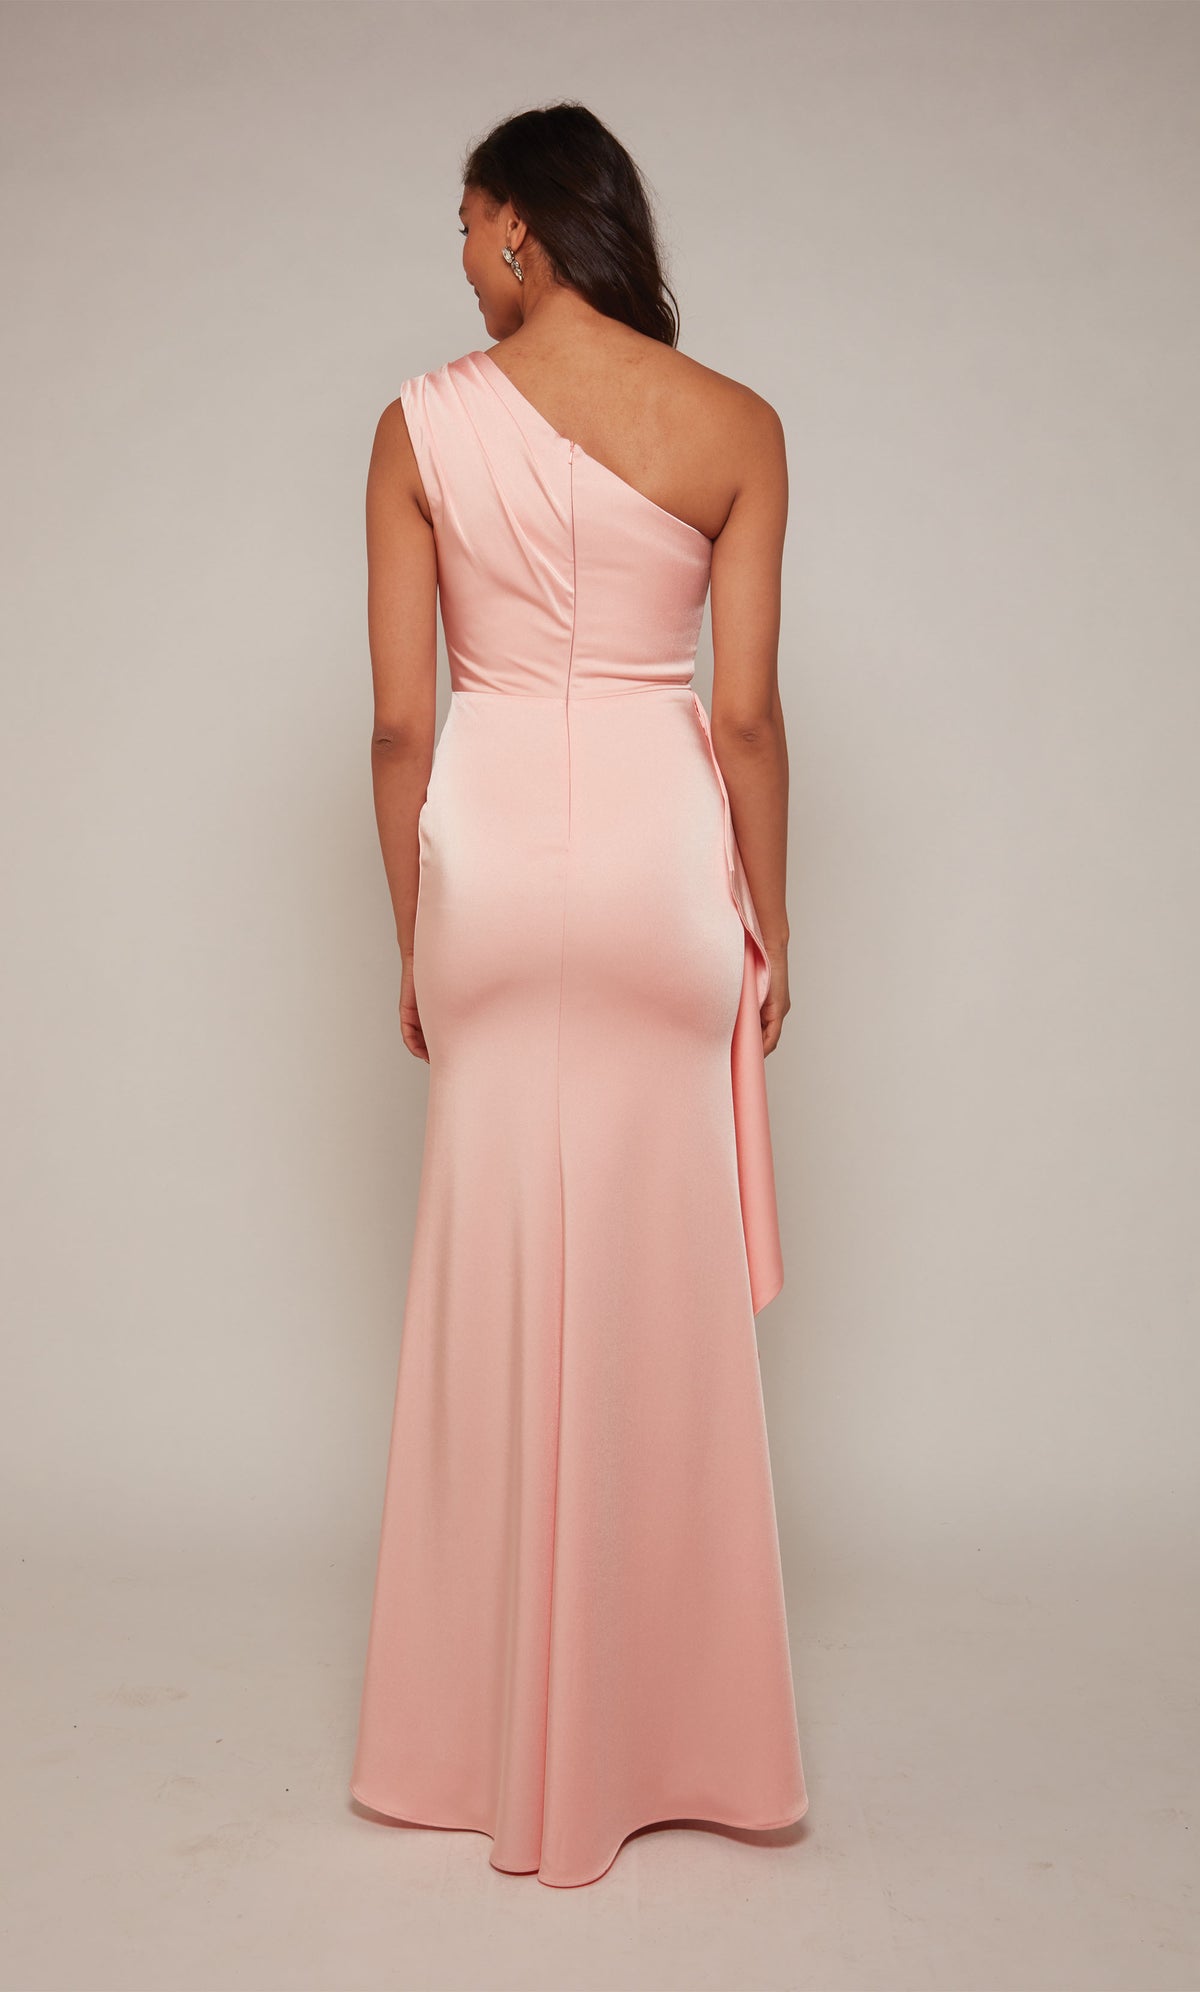 Long one shoulder side ruffle gown with ruching detail, an closed back, and train.